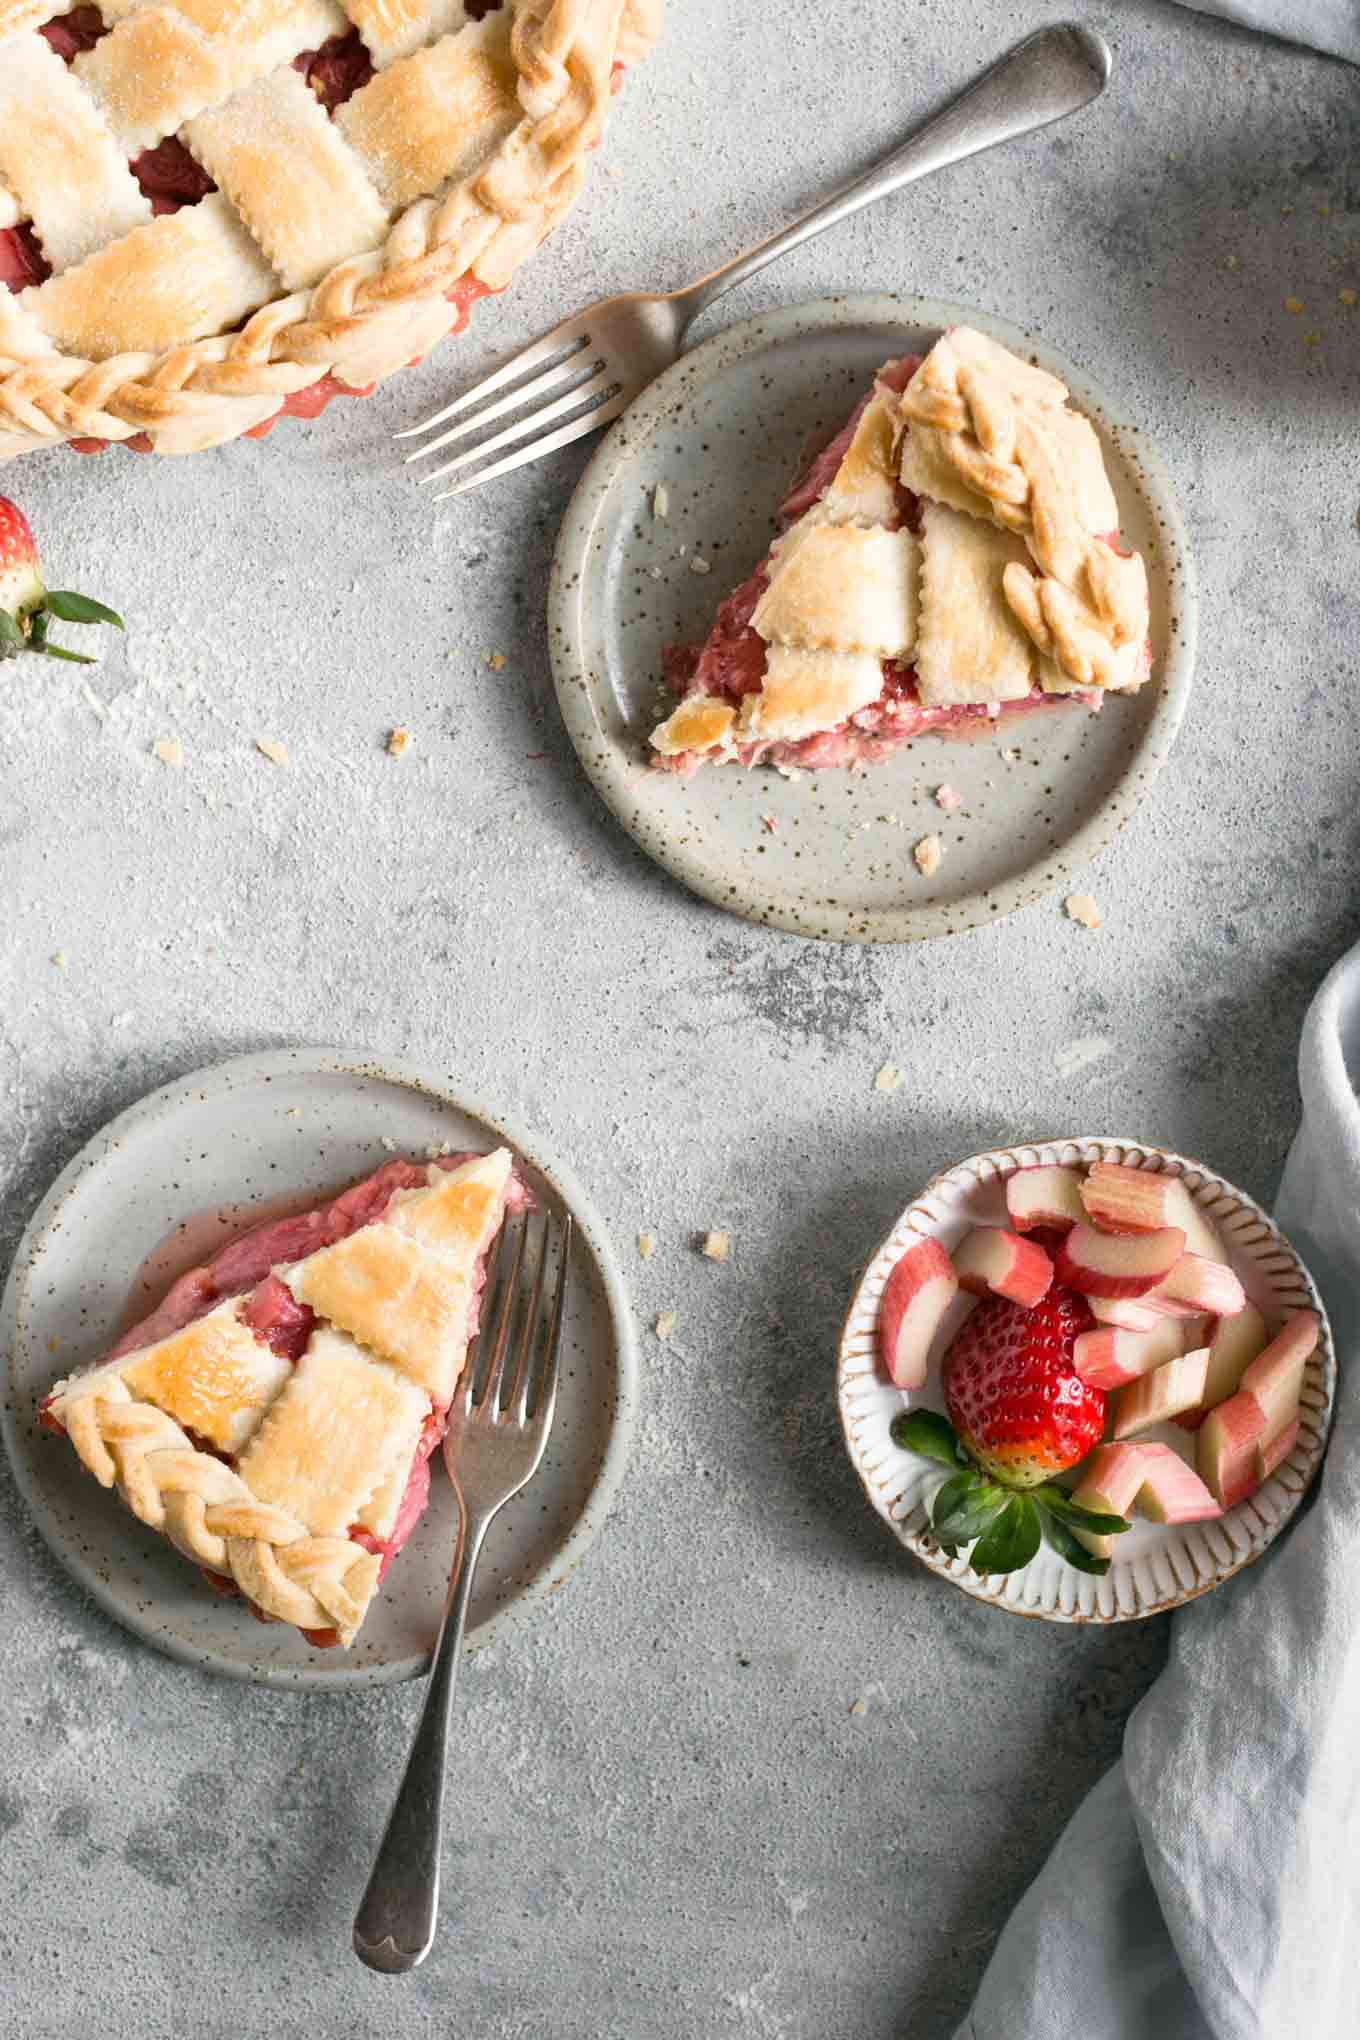 Lattice pie with rhubarb and strawberries. Easy recipe for a delicious classic! #dairyfree #rhubarbpie #strawberries #pie | via @annabanana.co